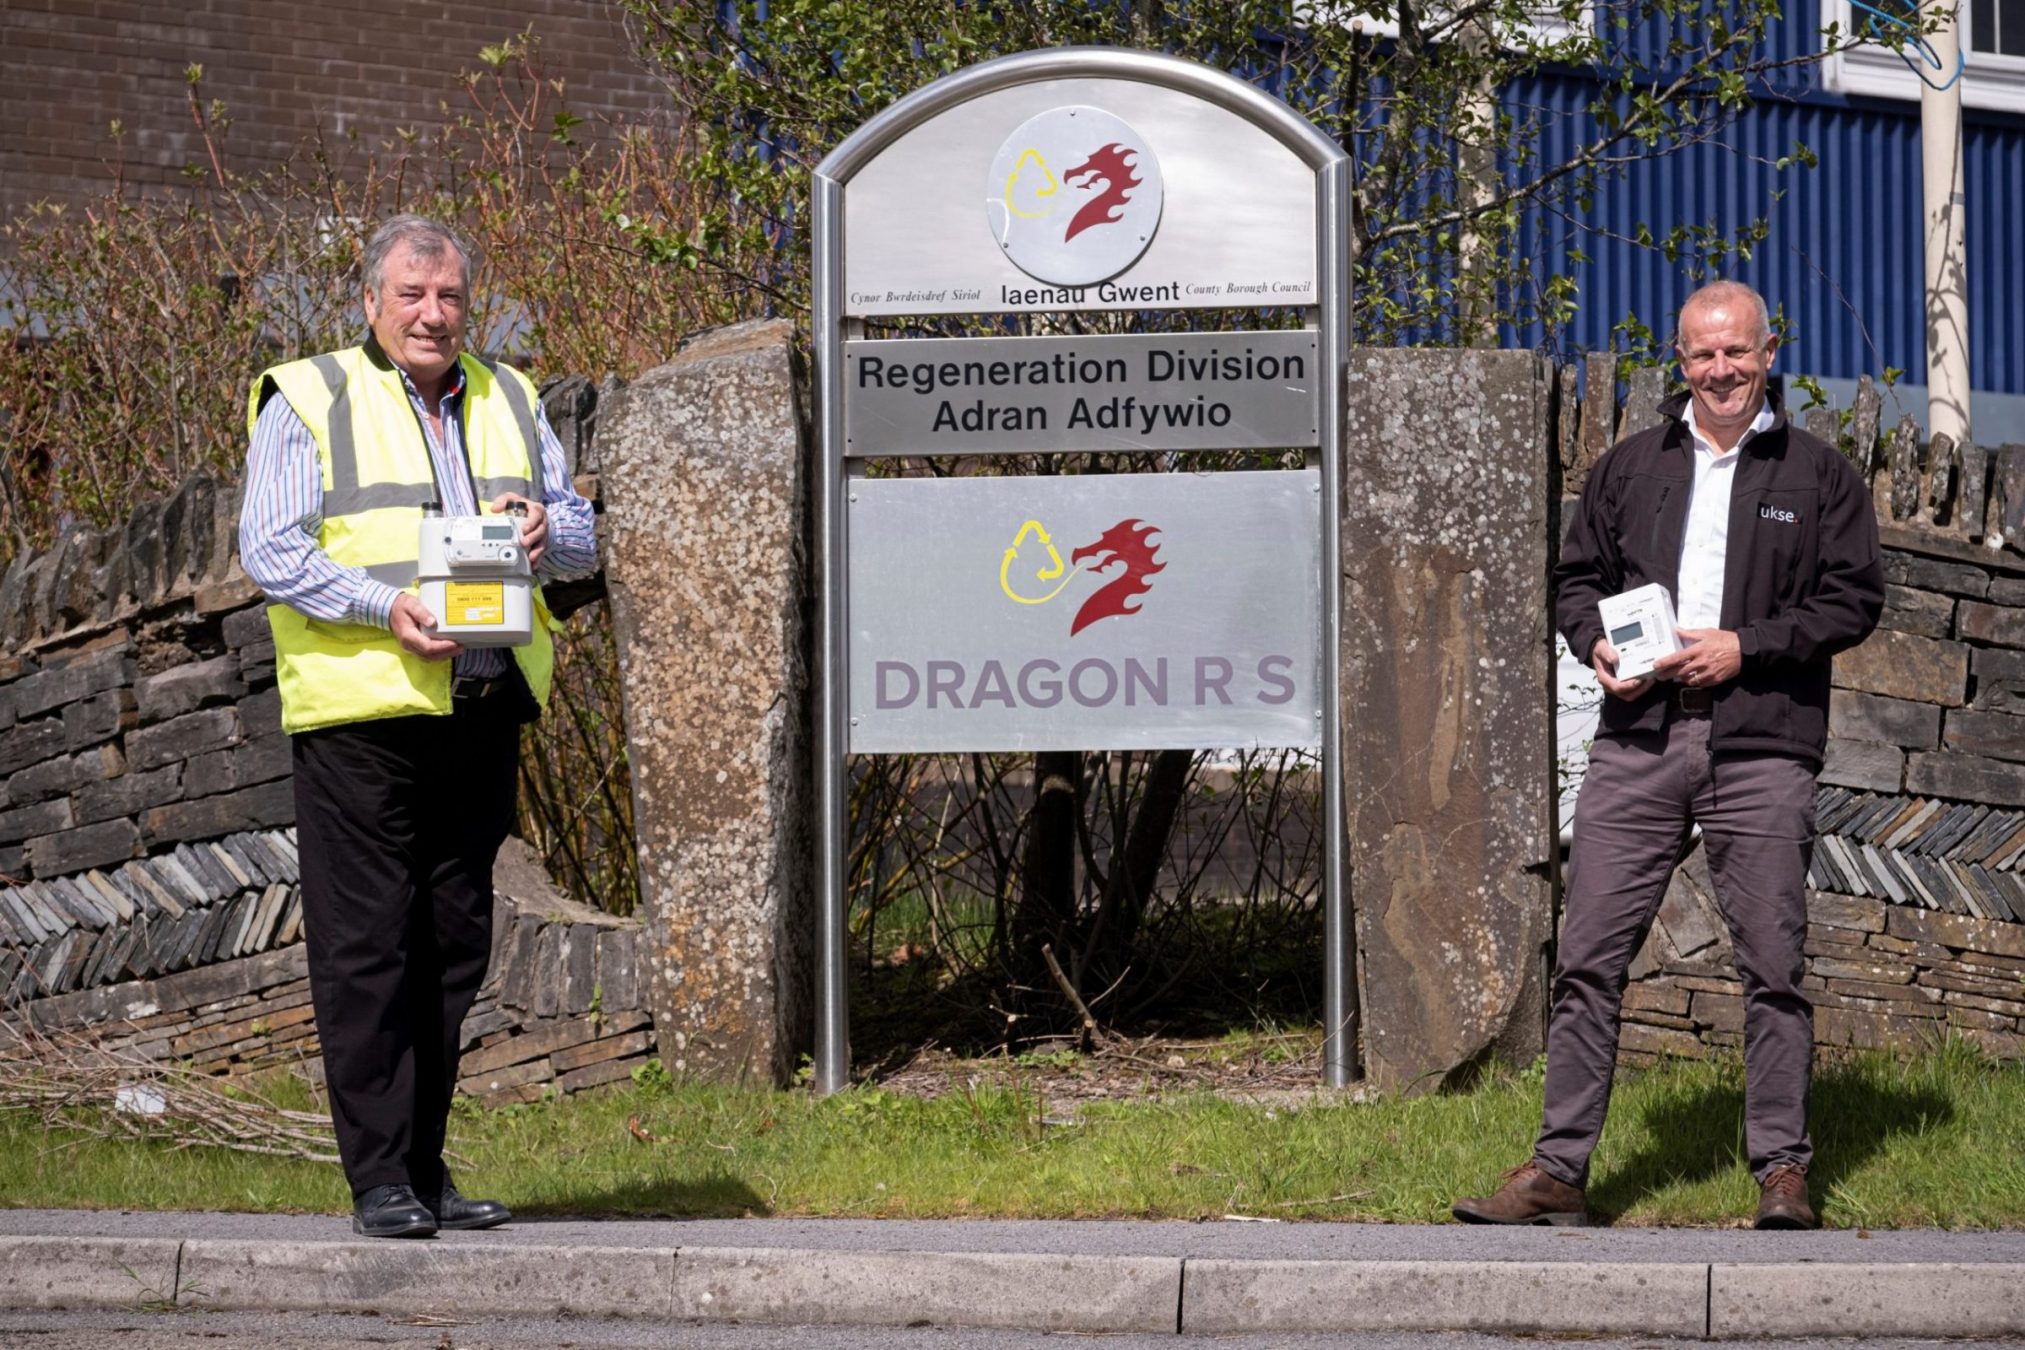 Mick Young from Dragon Recycling Solutions and Martin Palmer from UKSE stood outside in front of Dragon RS's business sign